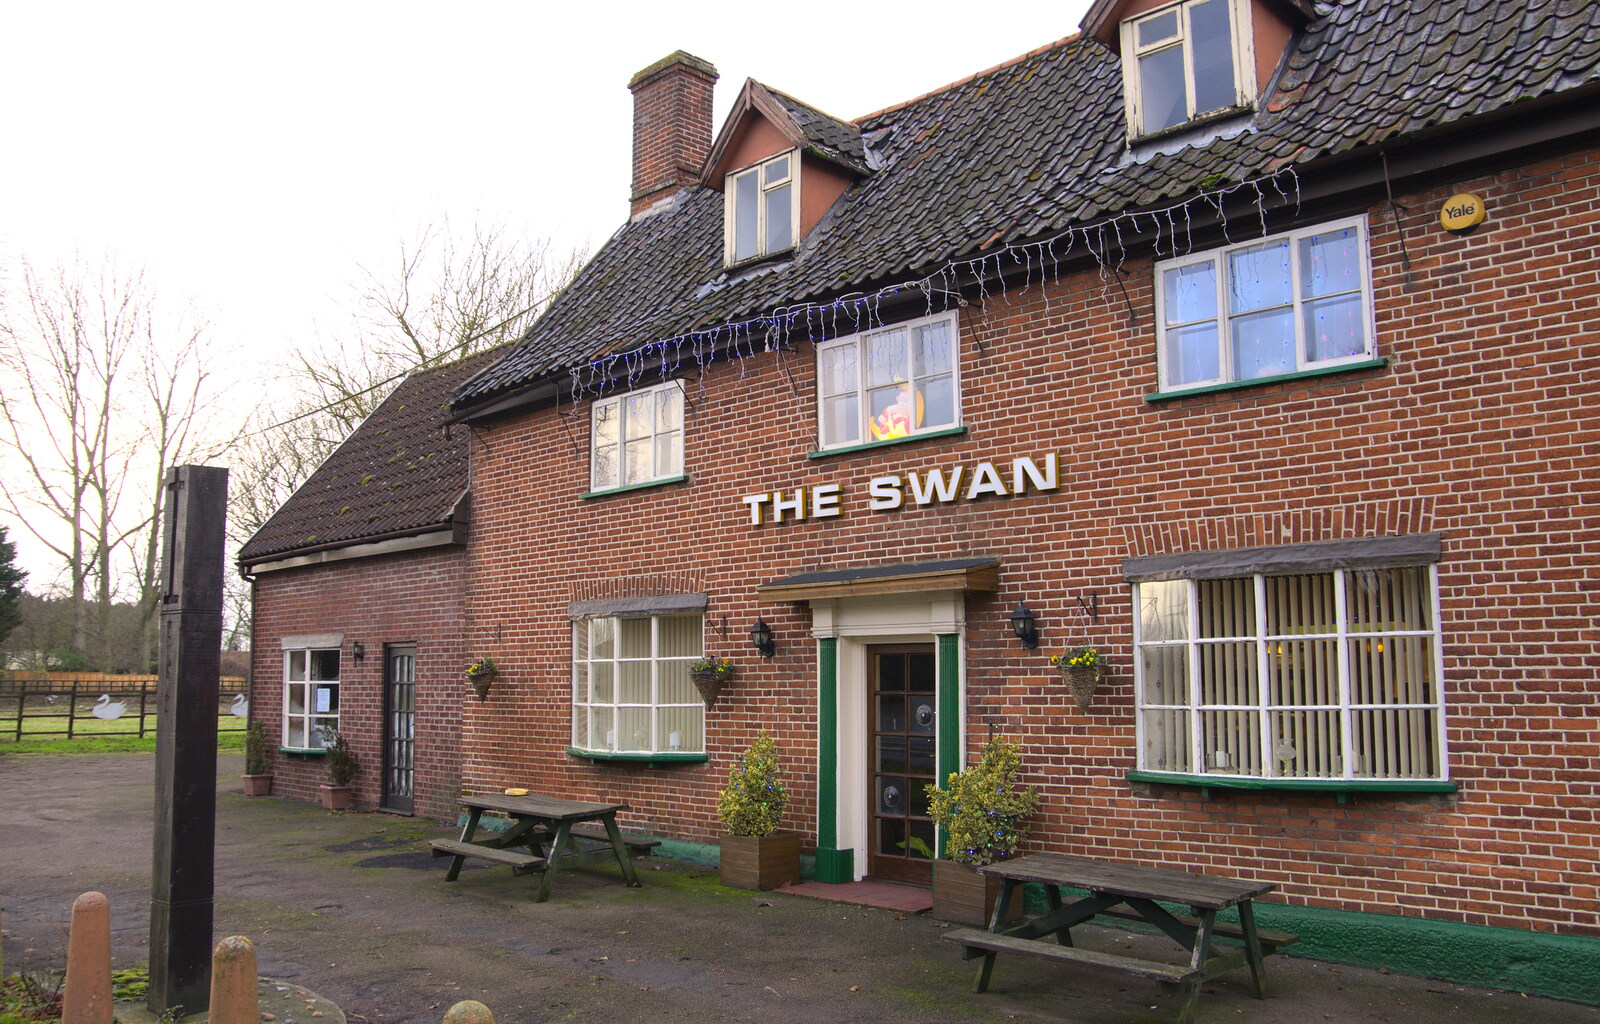 The Swan's missing sign from Christmas Day and The Swan Inn, Brome, Suffolk - 25th December 2017